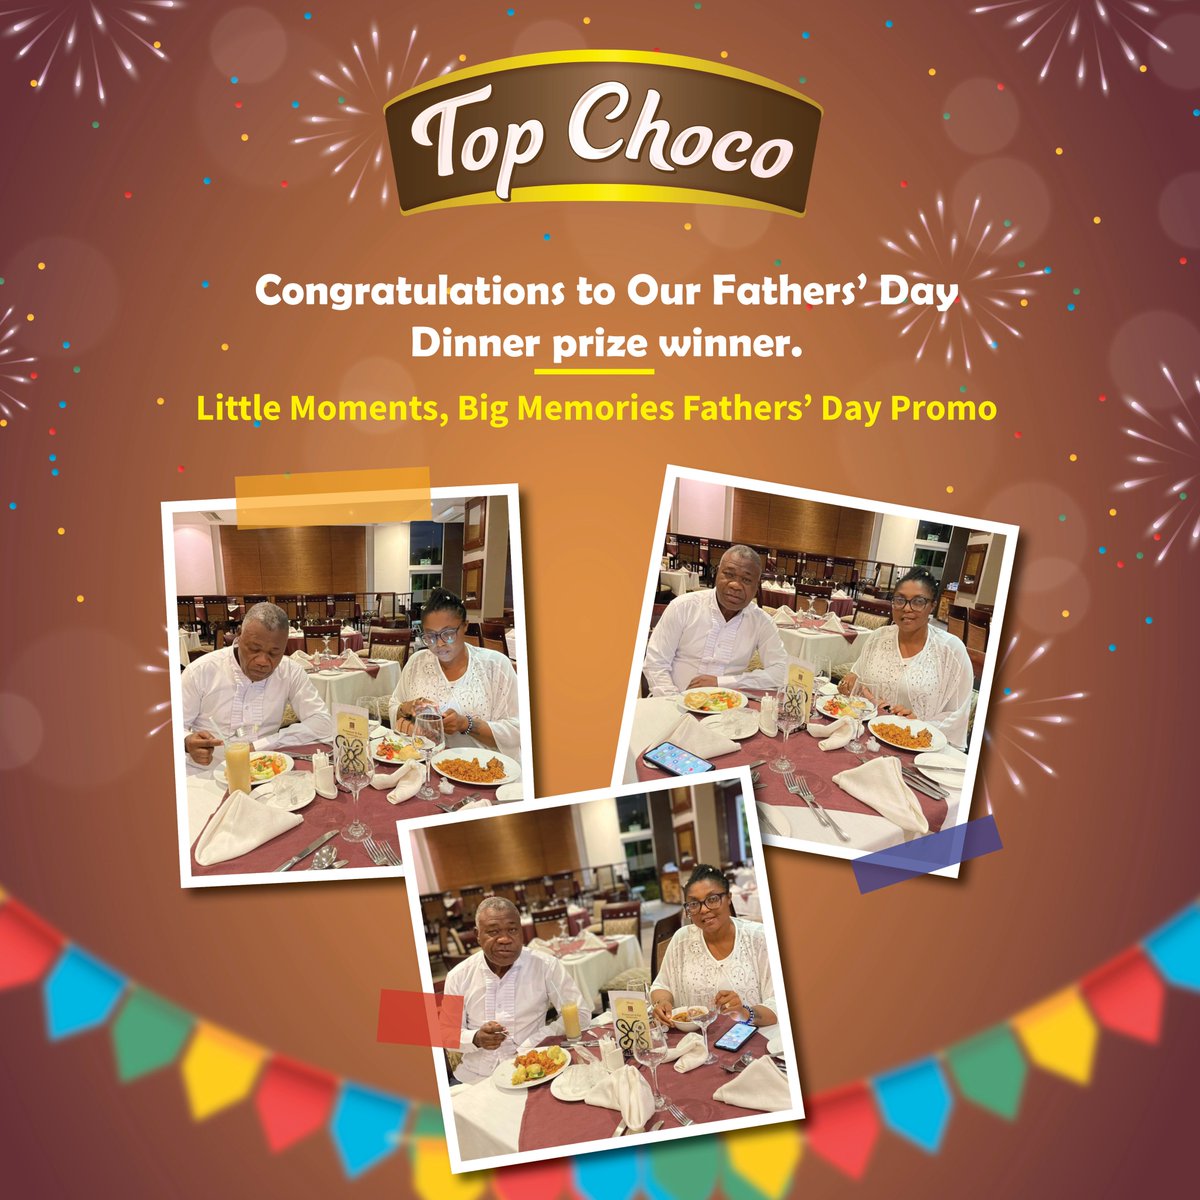 The Little Moments, Big Memories promo winner had a wonderful time with her dad over the weekend. #mydadmychocolaty

#Topchoco #Chocolaty #Chocolate #cocoa #cacao #fathersday2022